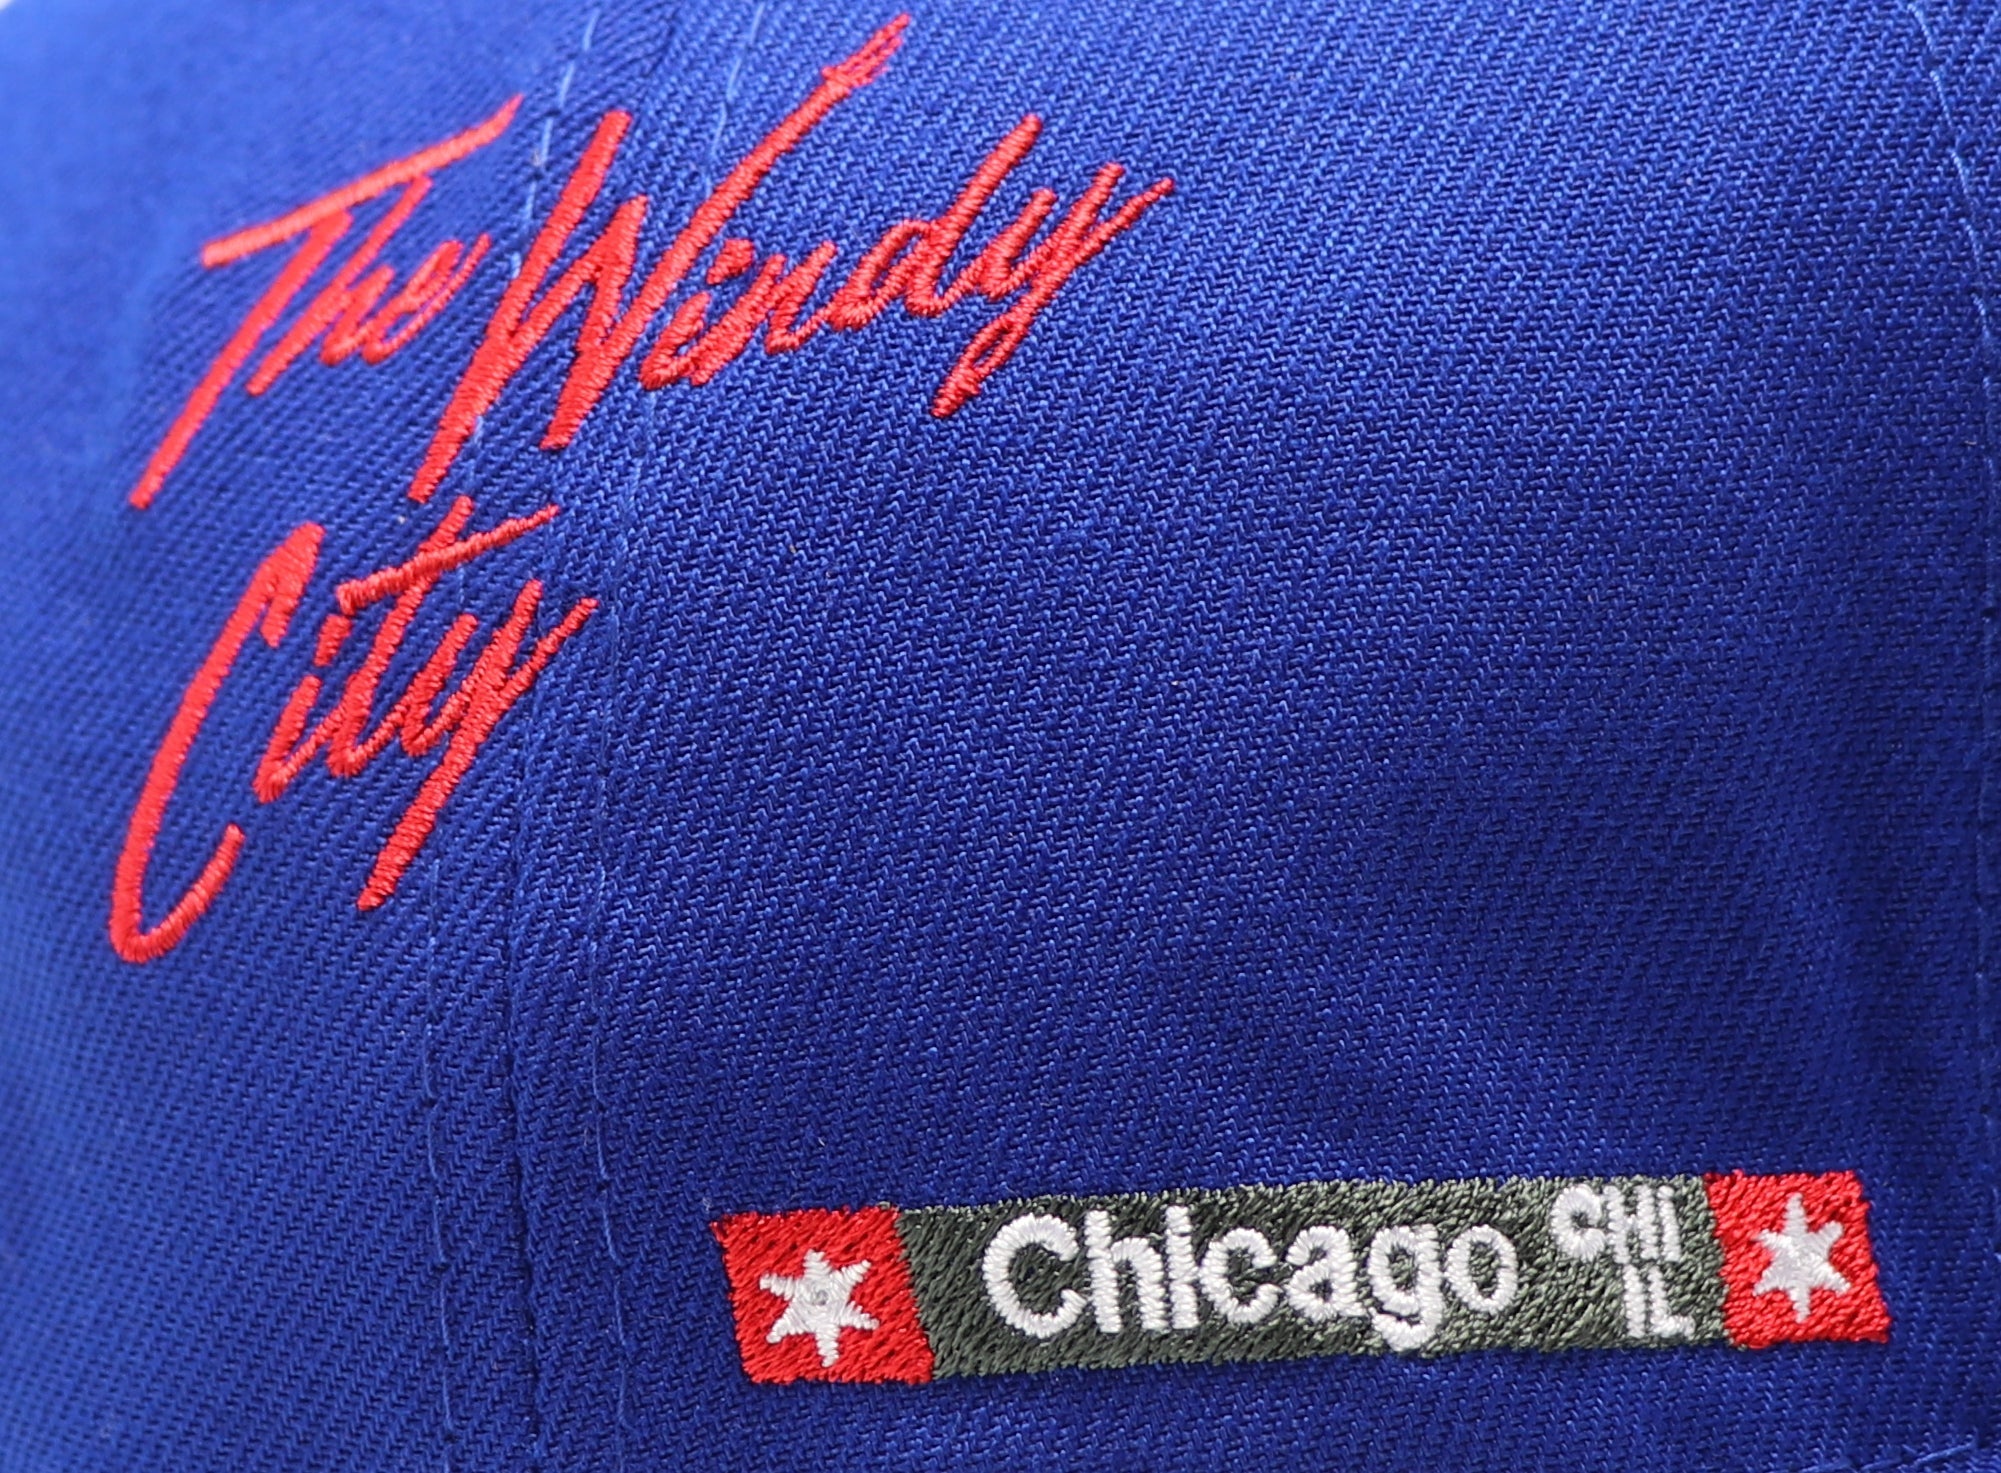 CHICAGO CUBS (CITY TRANSIT) NEW ERA 59FIFTY FITTED